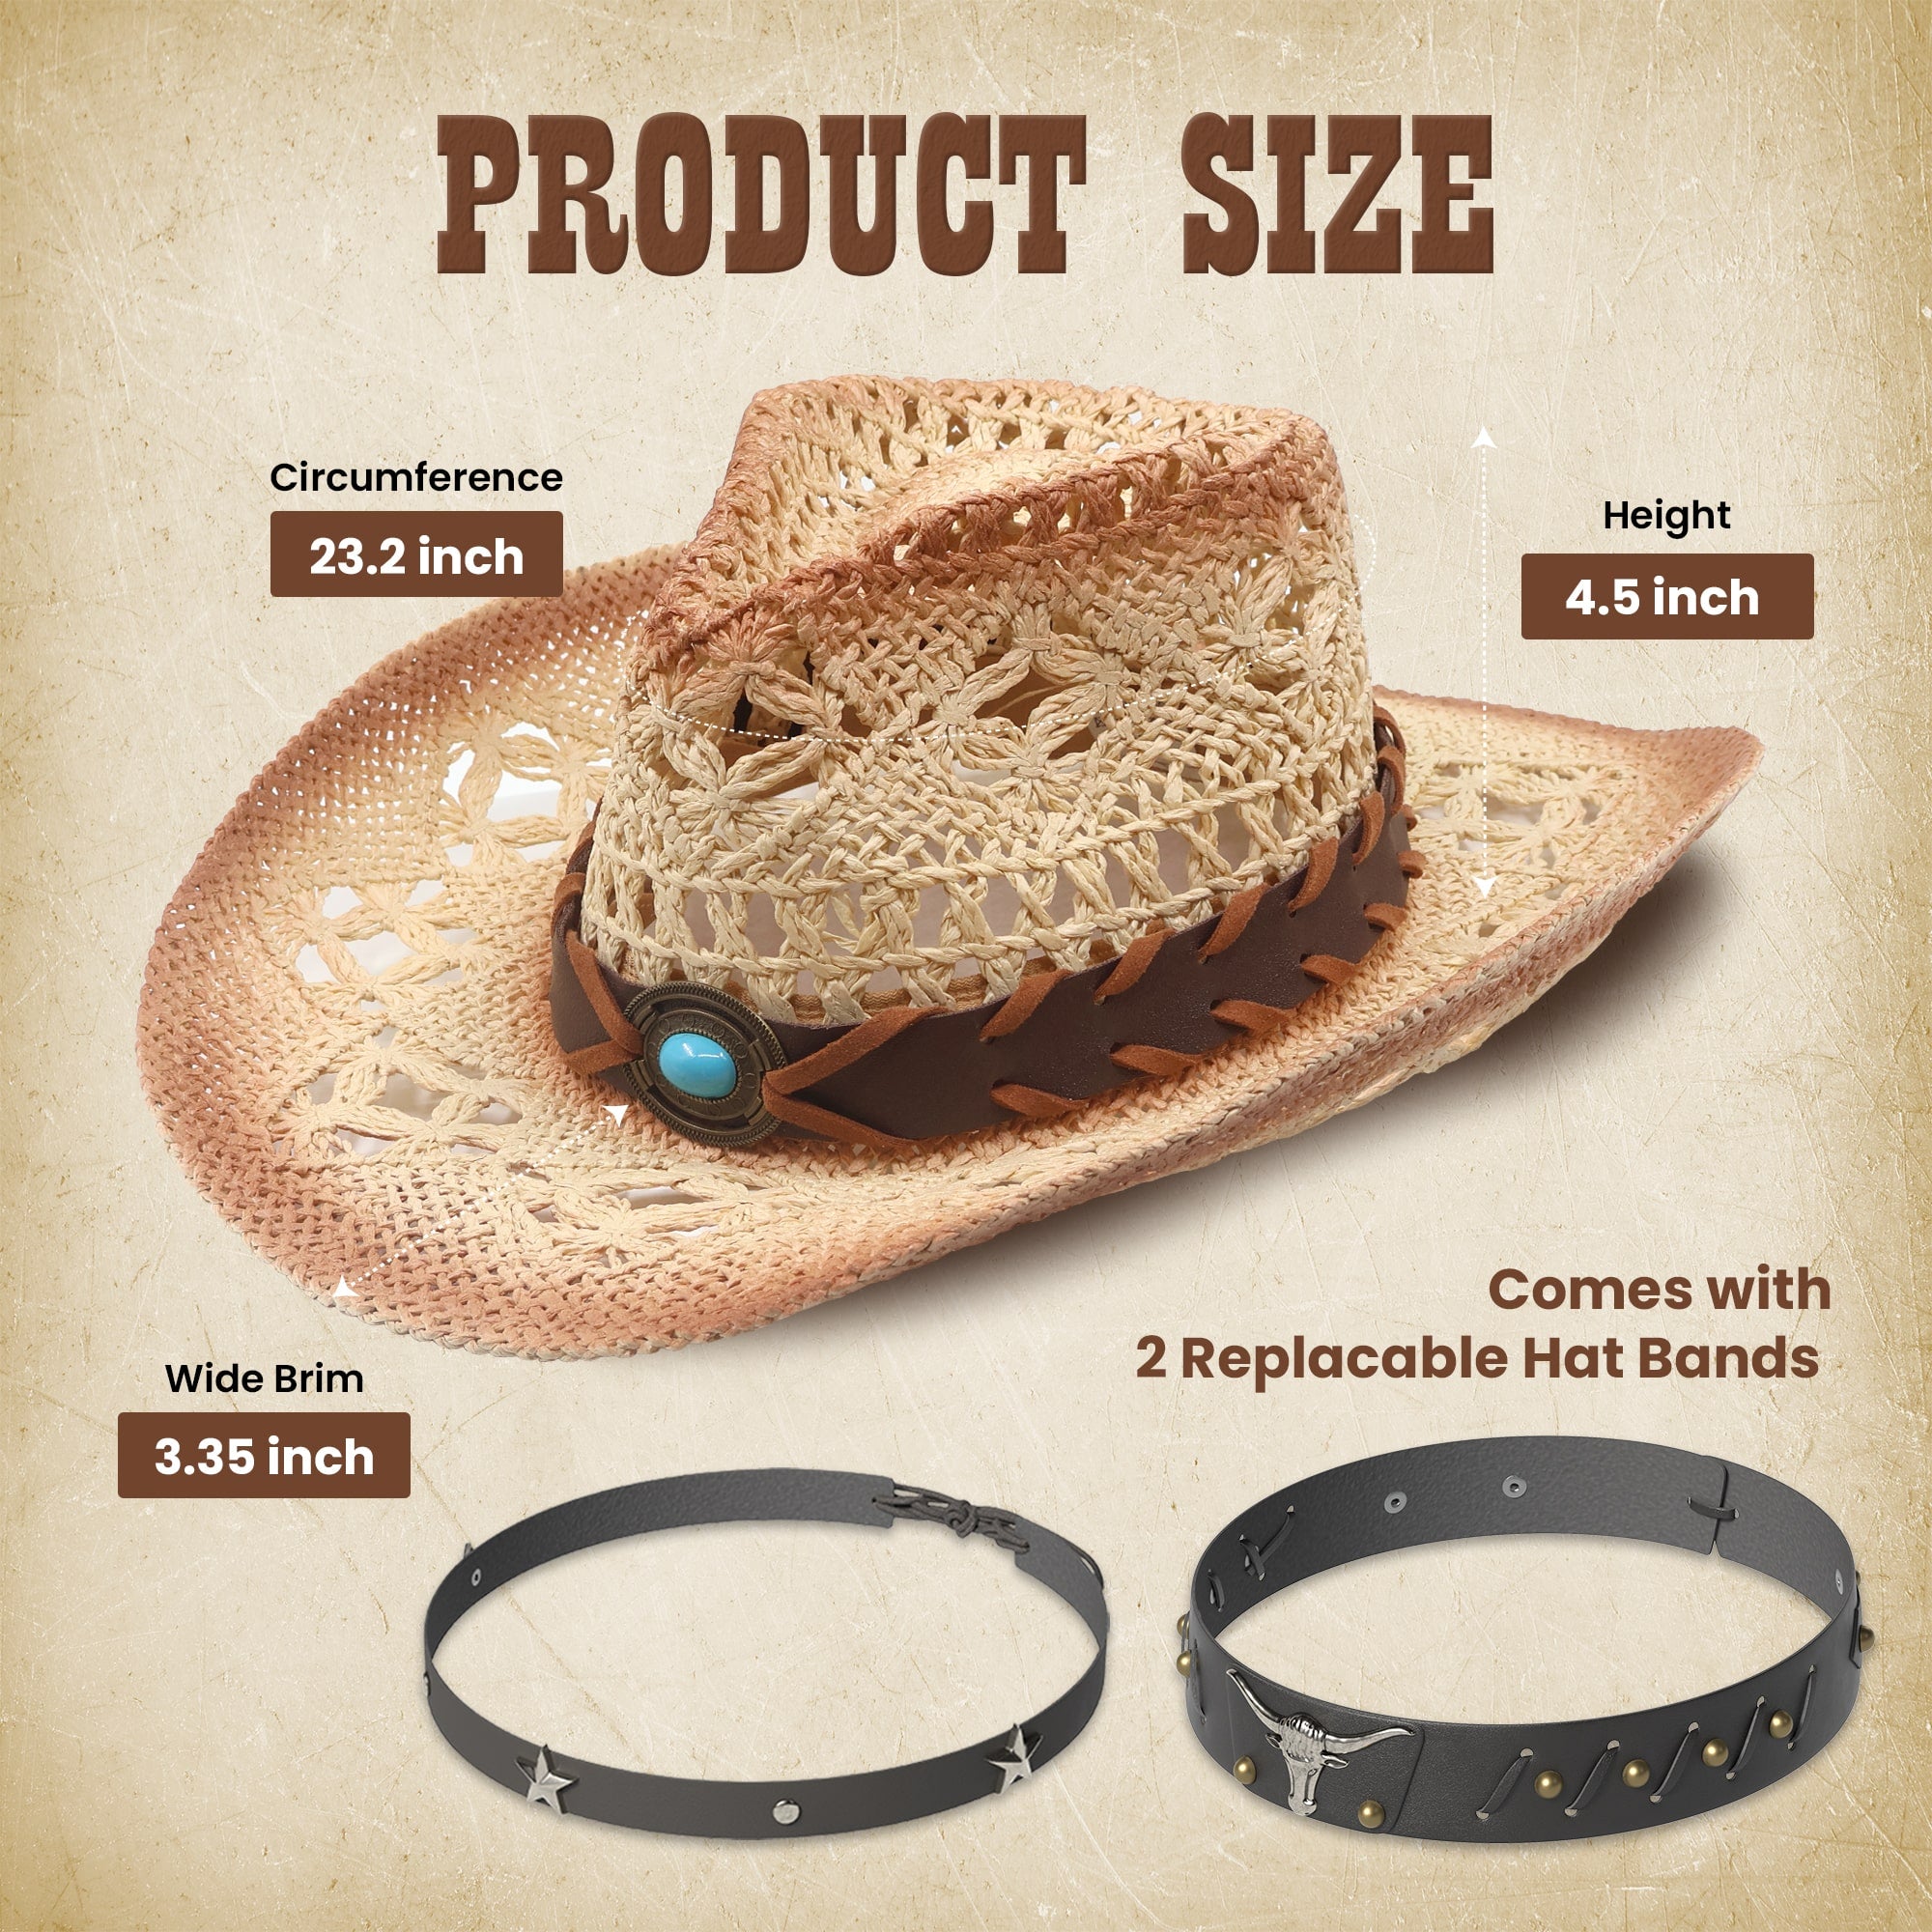 Funcredible Straw Cowboy Hat - Woven Cowgirl Hat with 3 Replaceable Hat Bands - Vintage Western Cowgirl Hat - Aesthetic Cowboy Hat for Women and Men Western Style - Trendy Cowgirl Cowboy Hat